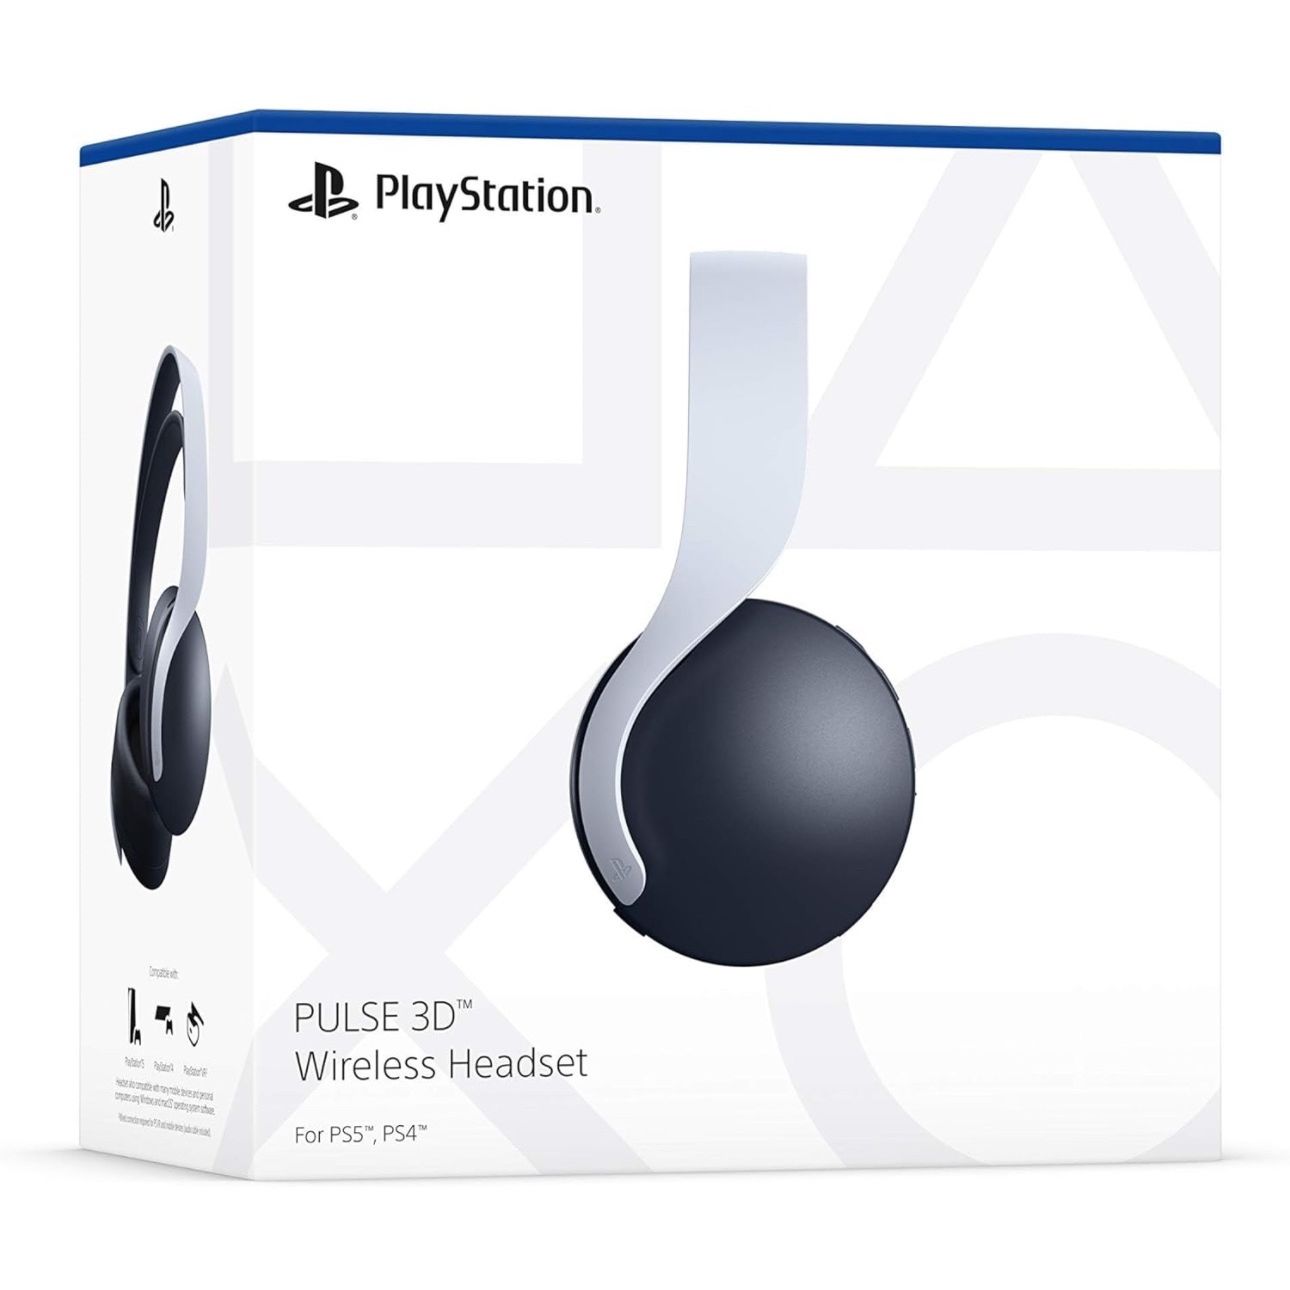 PS5 Pulse headset, Brand New, Unopened